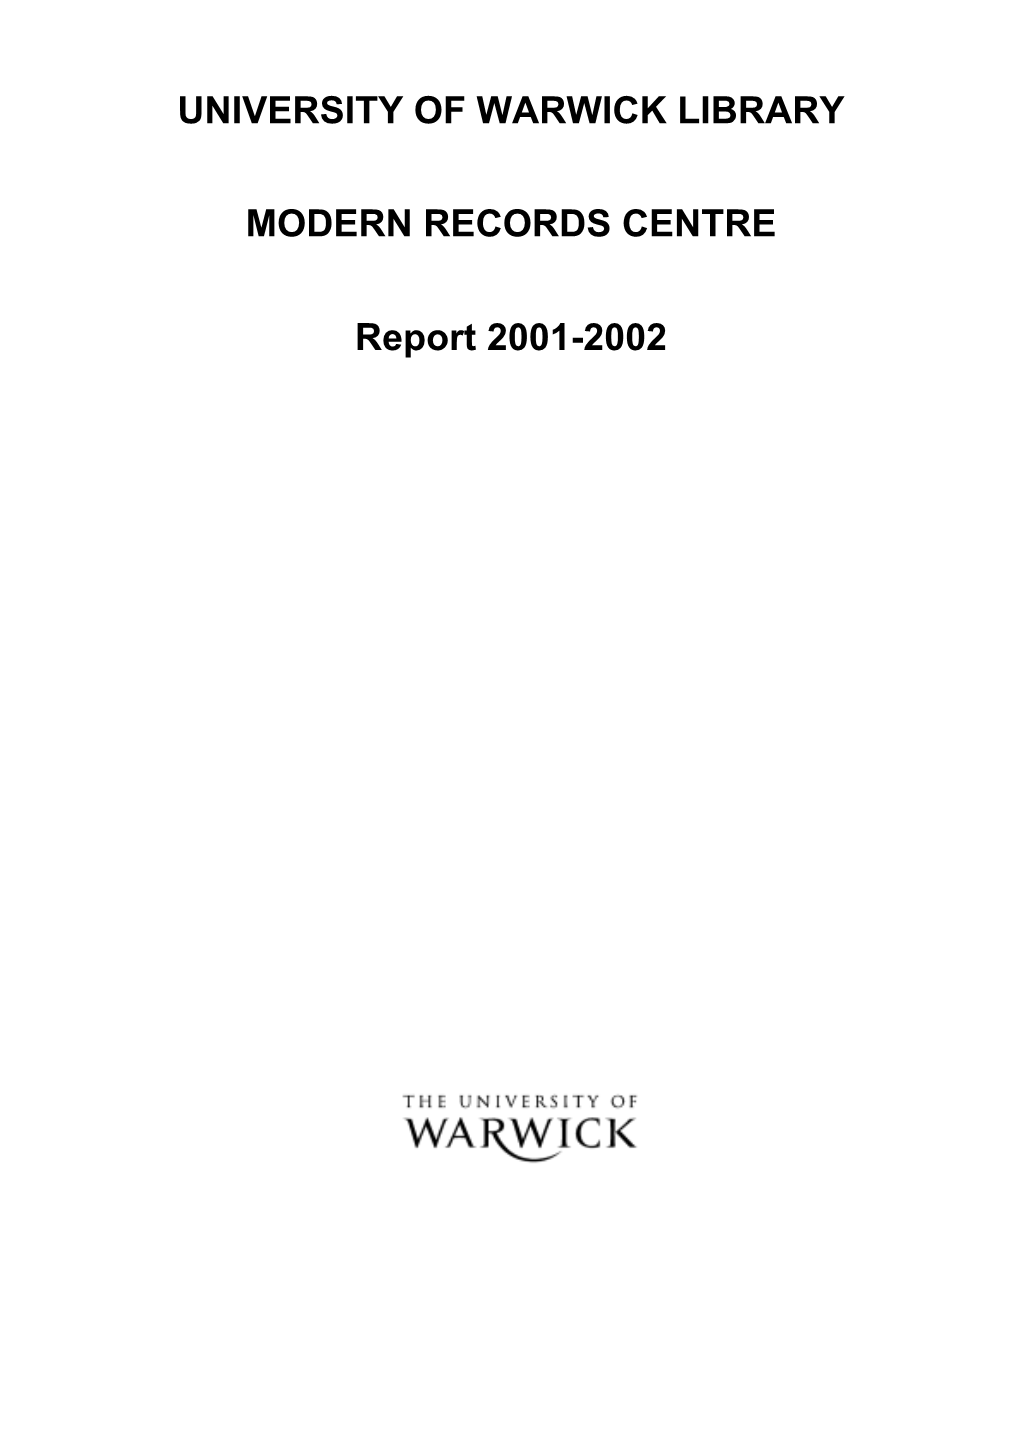 UNIVERSITY of WARWICK LIBRARY MODERN RECORDS CENTRE Report 2001-2002